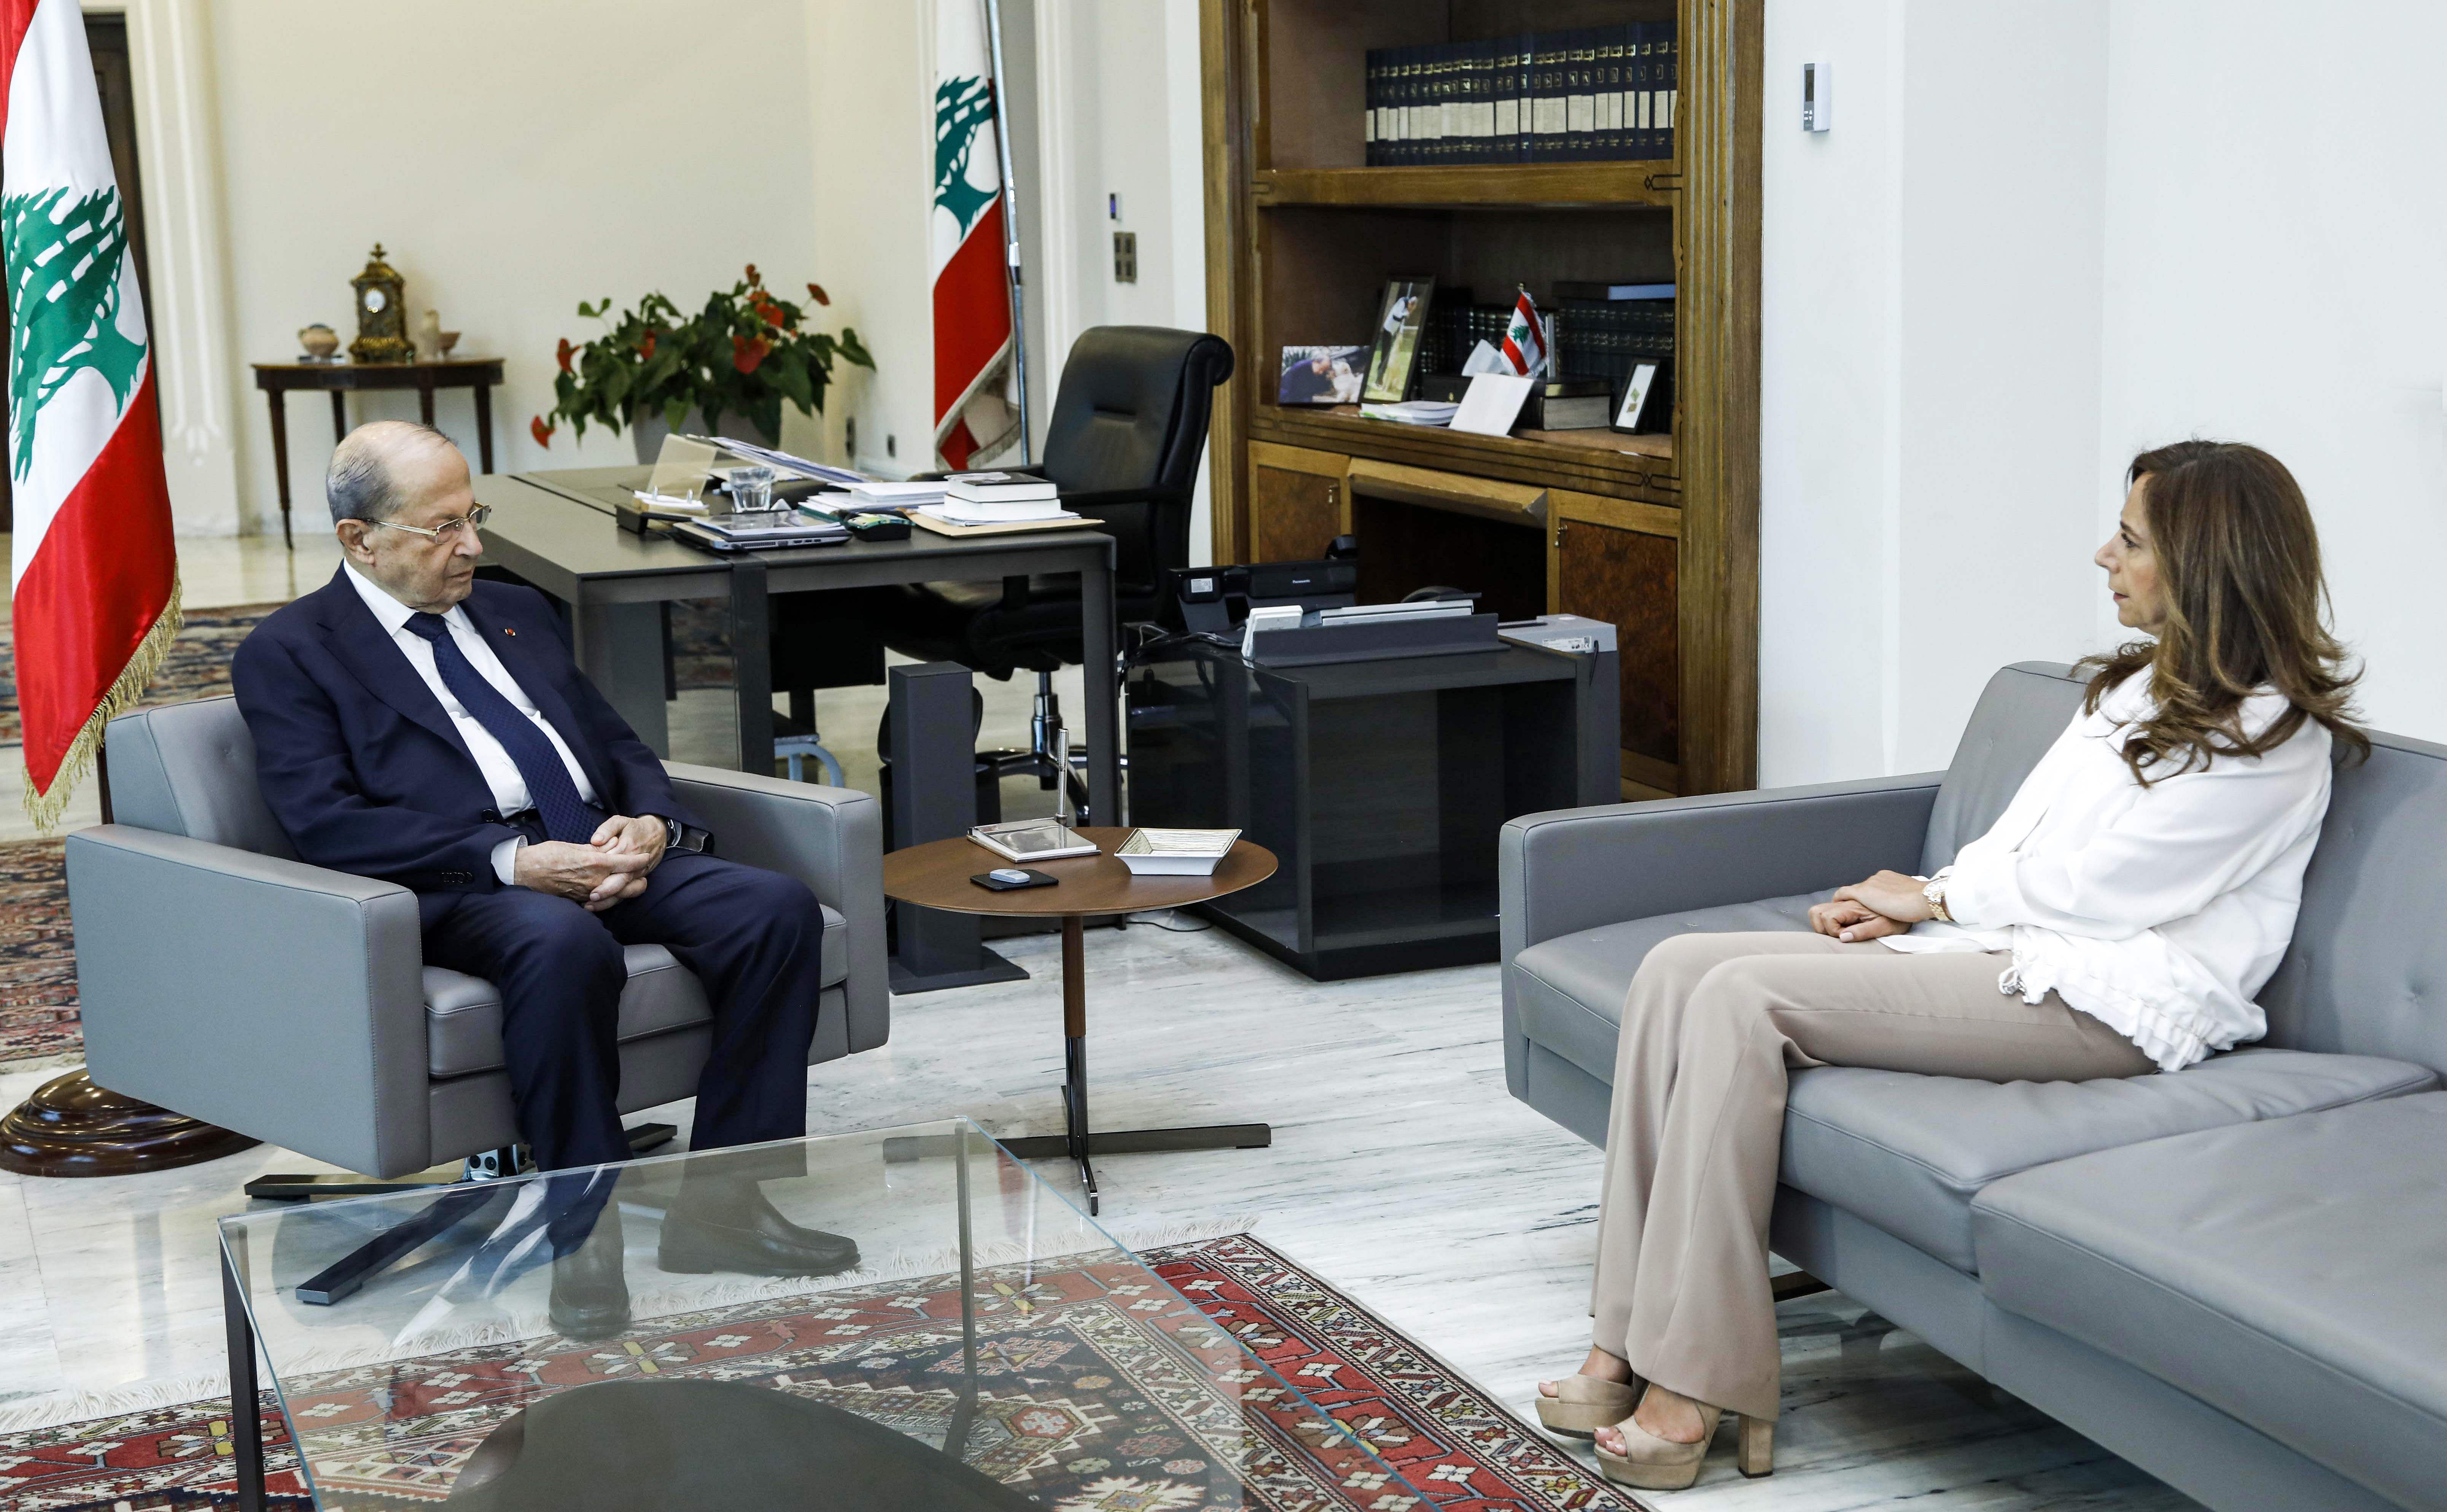 Lebanese president Michel Aoun meeting with defence minister Zeina Akar at the presidential palace in Baabda, east of Beirut. Credit: AFP Photo